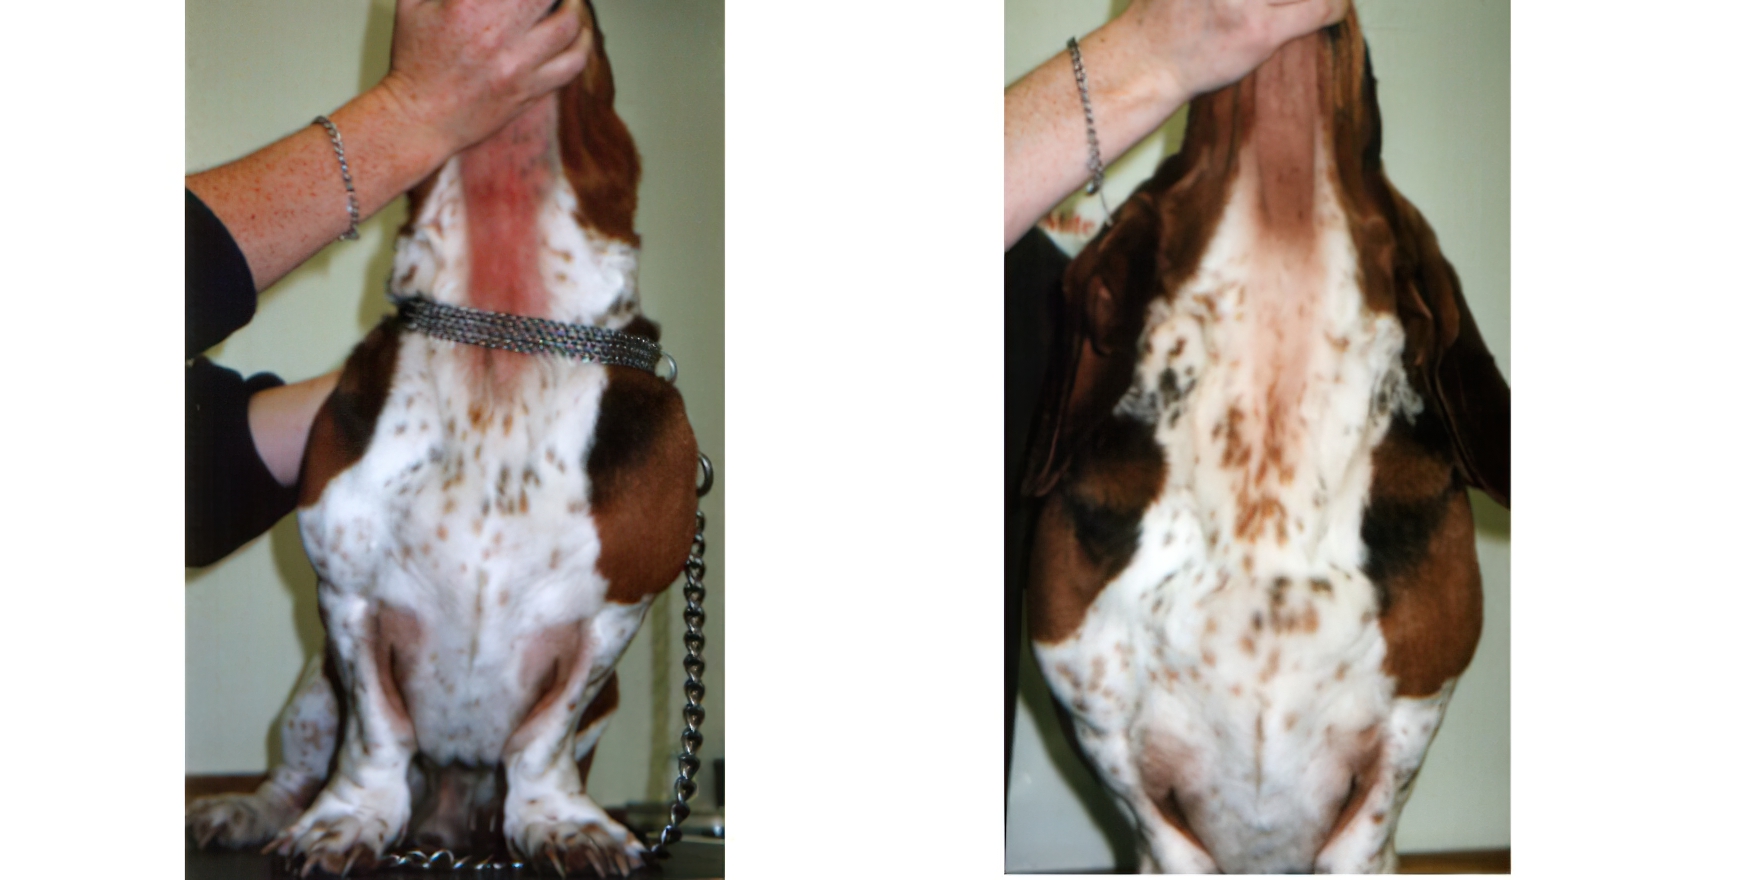 Malassezia Dermatitis: before & after 8 weeks of Topical Treatment, Bassett Hound